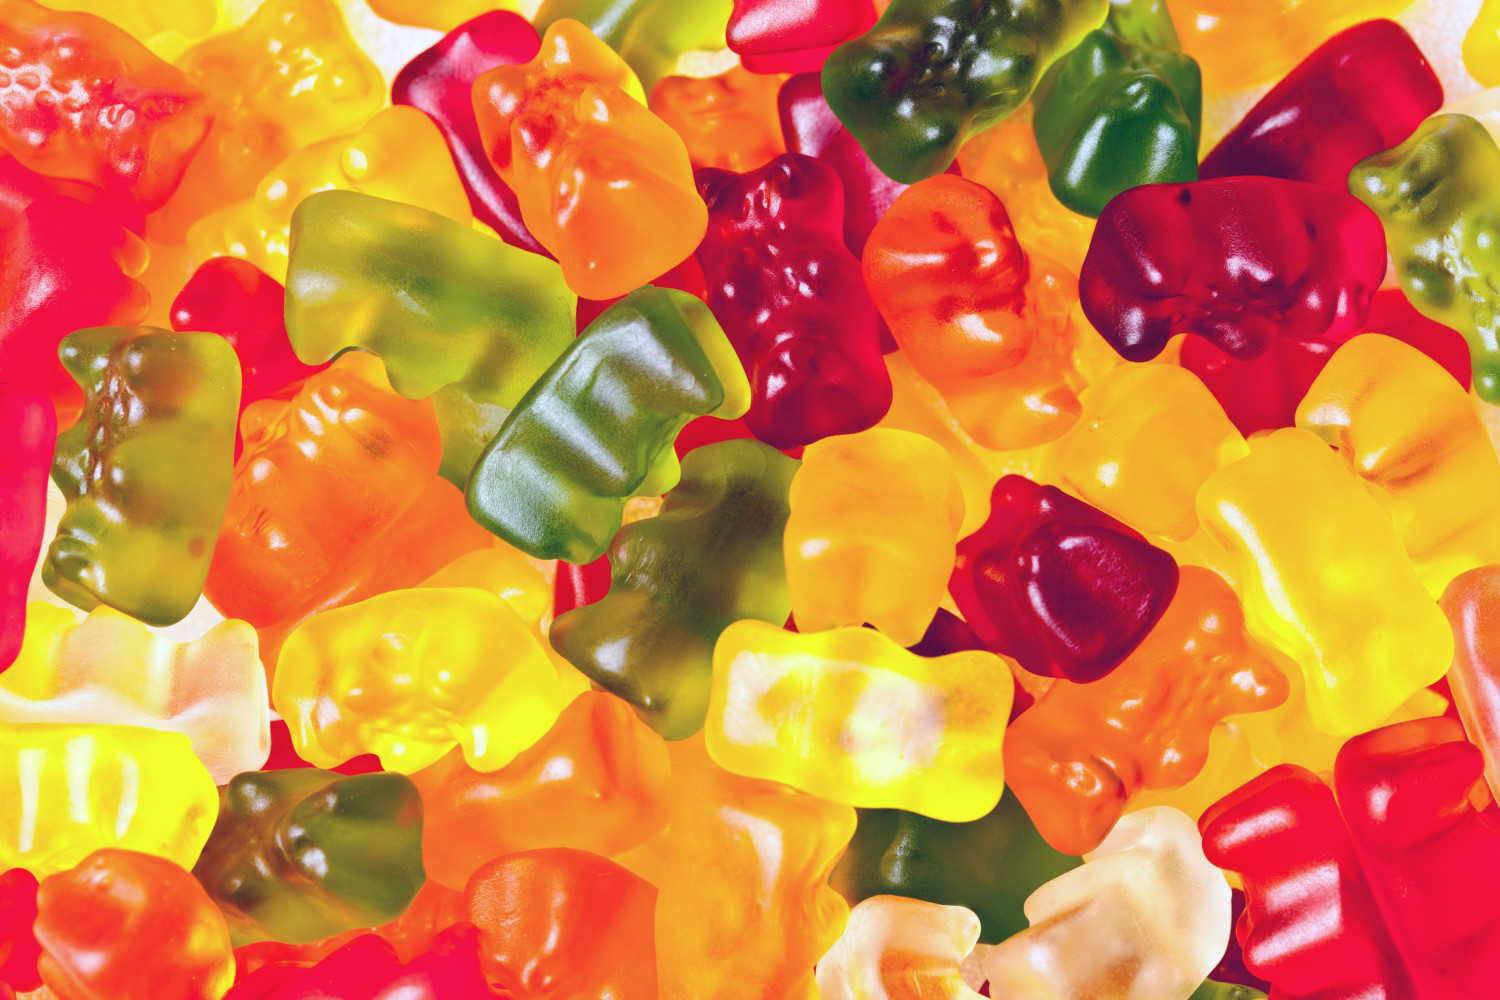 Gummy bears in many colors